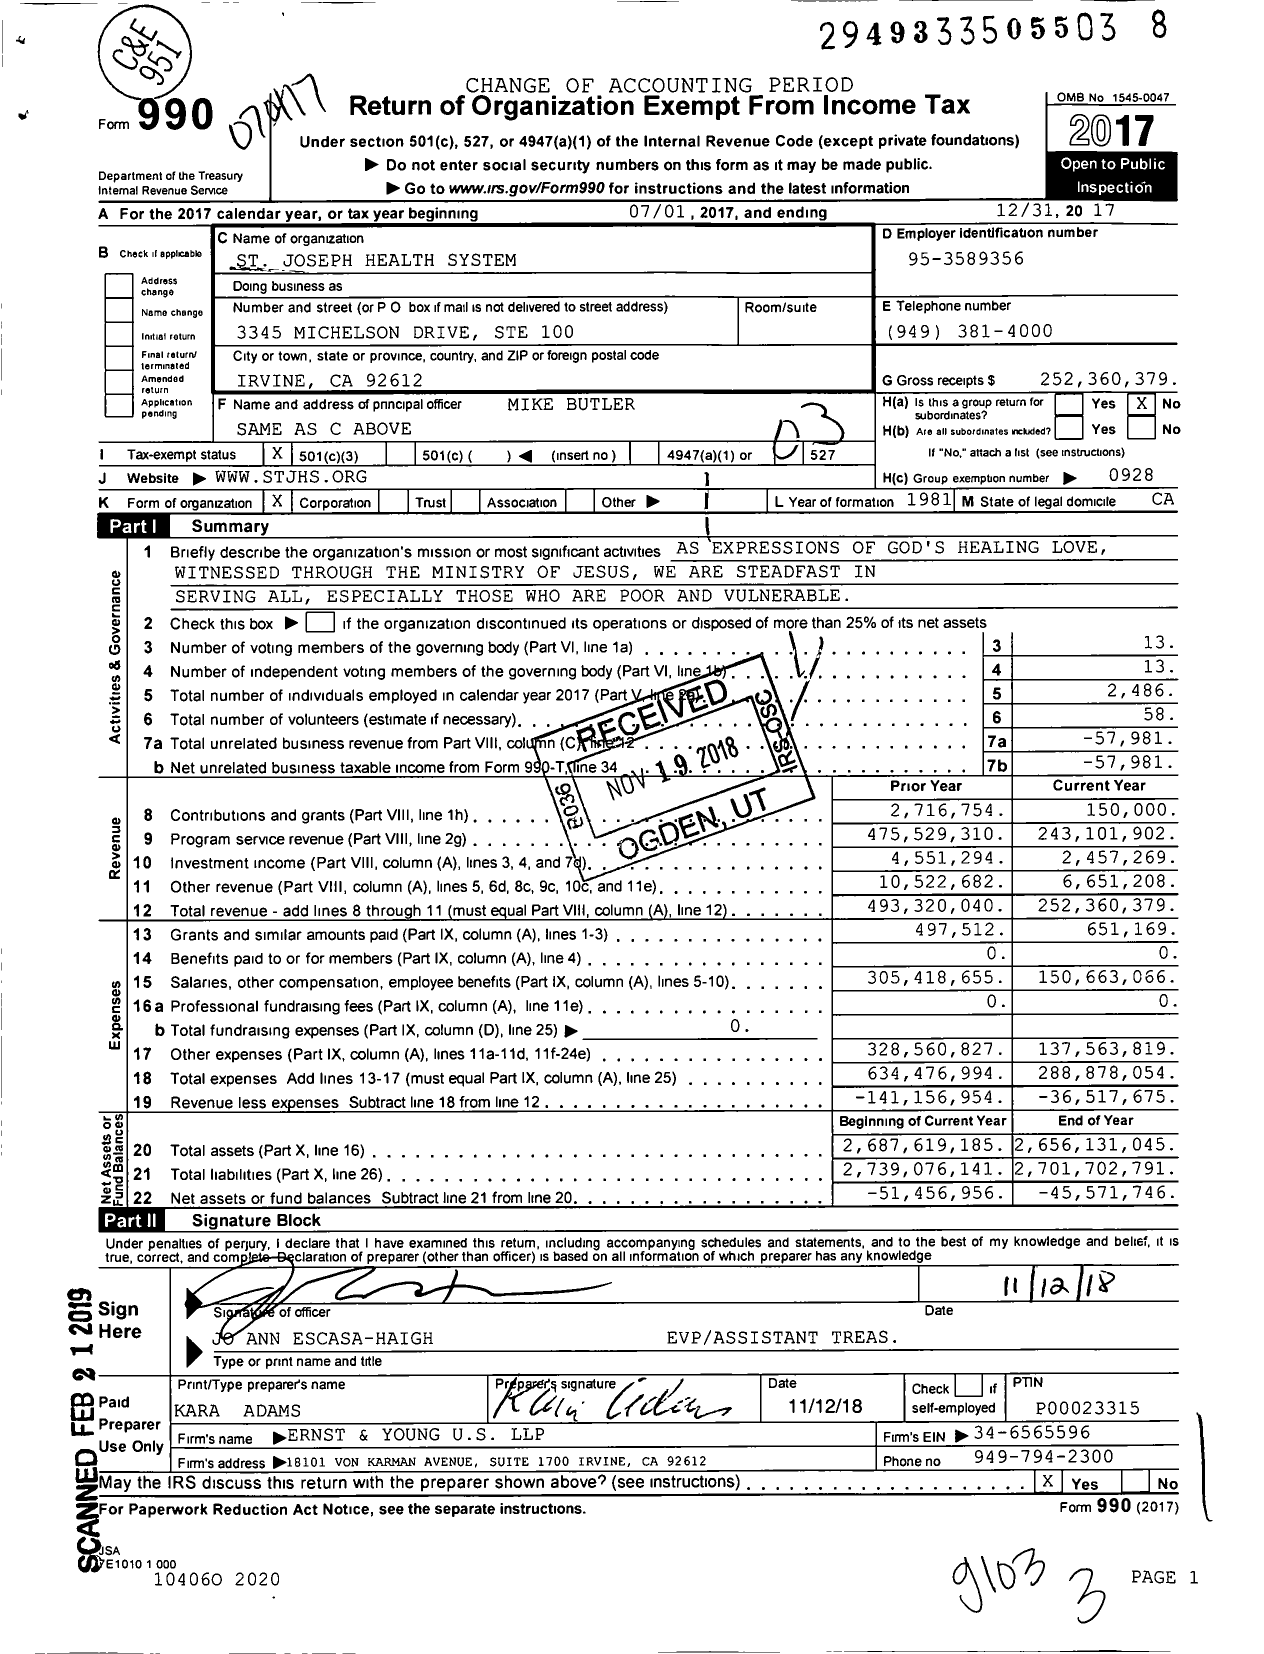 Image of first page of 2017 Form 990 for Saint Joseph Health (SJH)